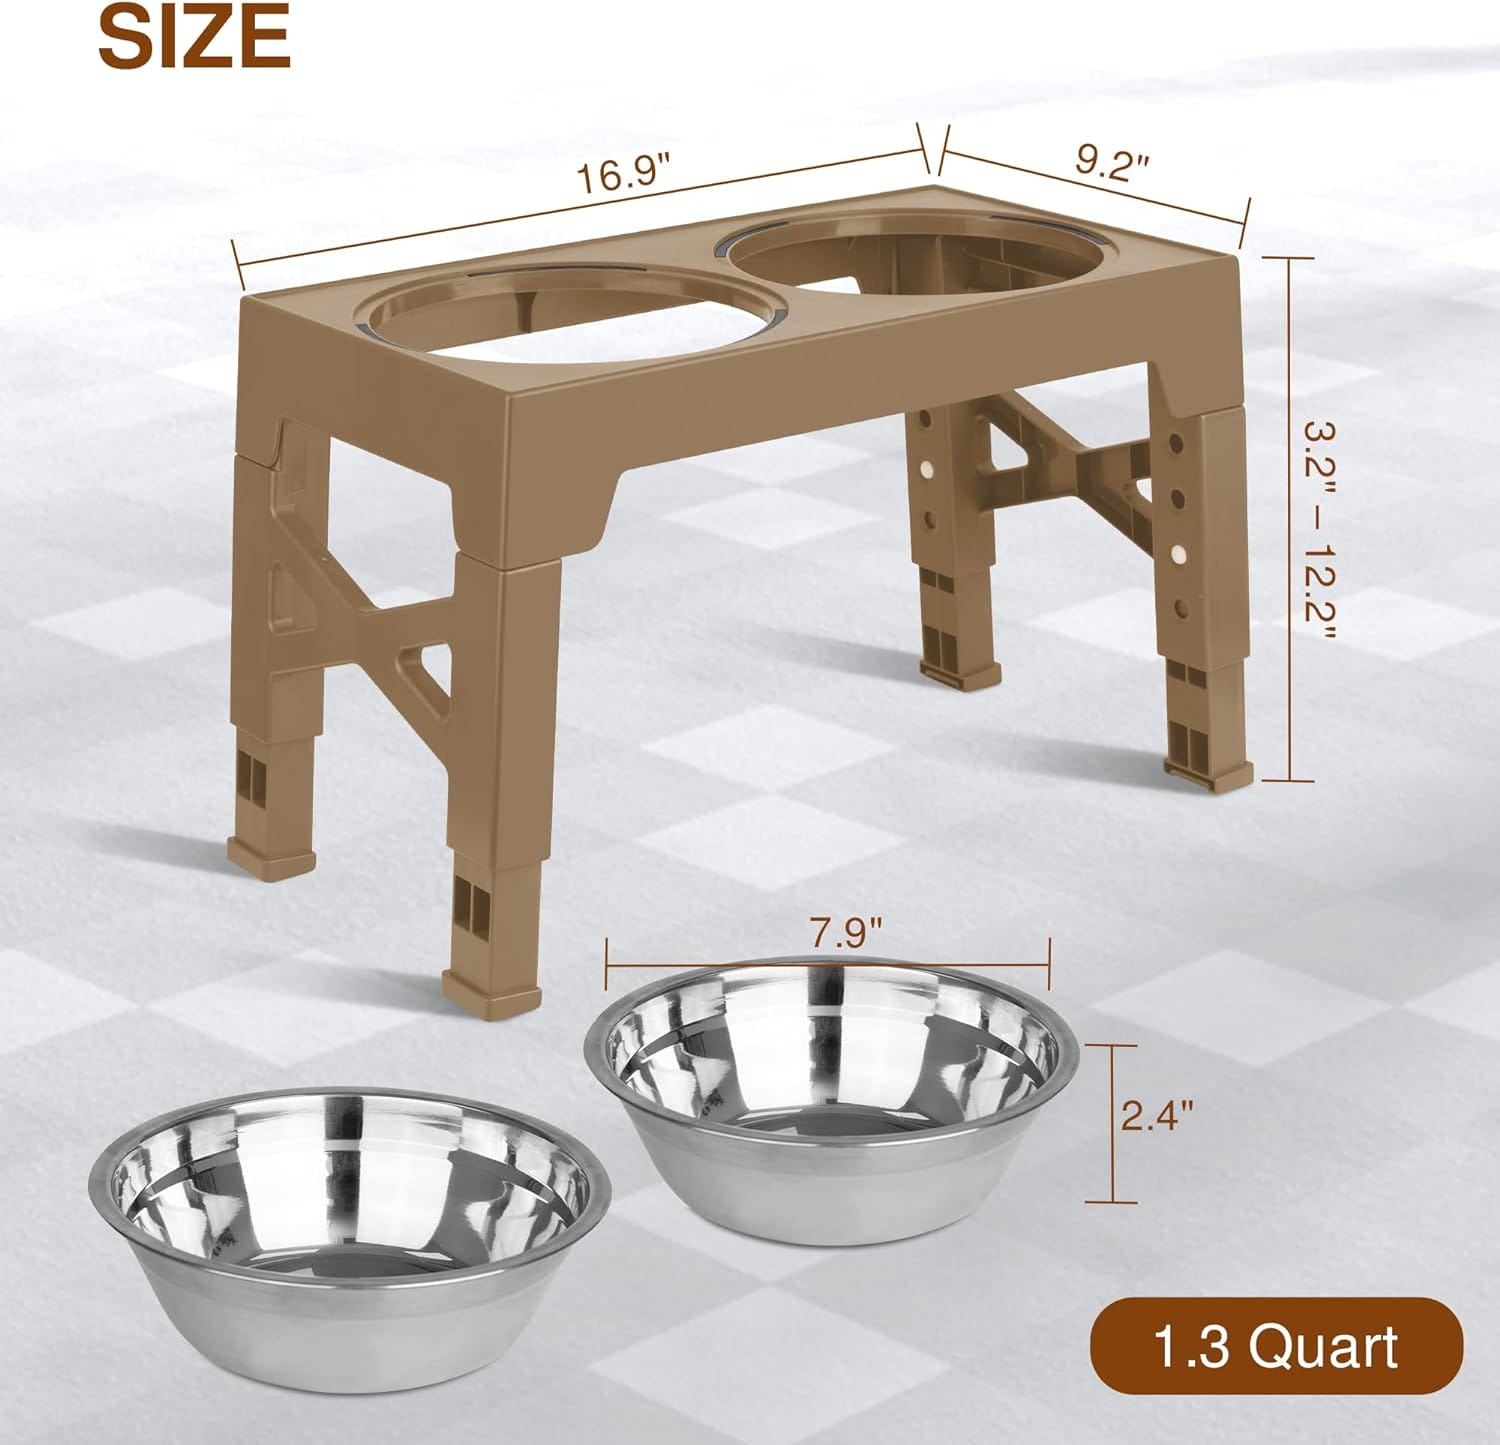 Adjustable Heights Dog Bowl Stand Review